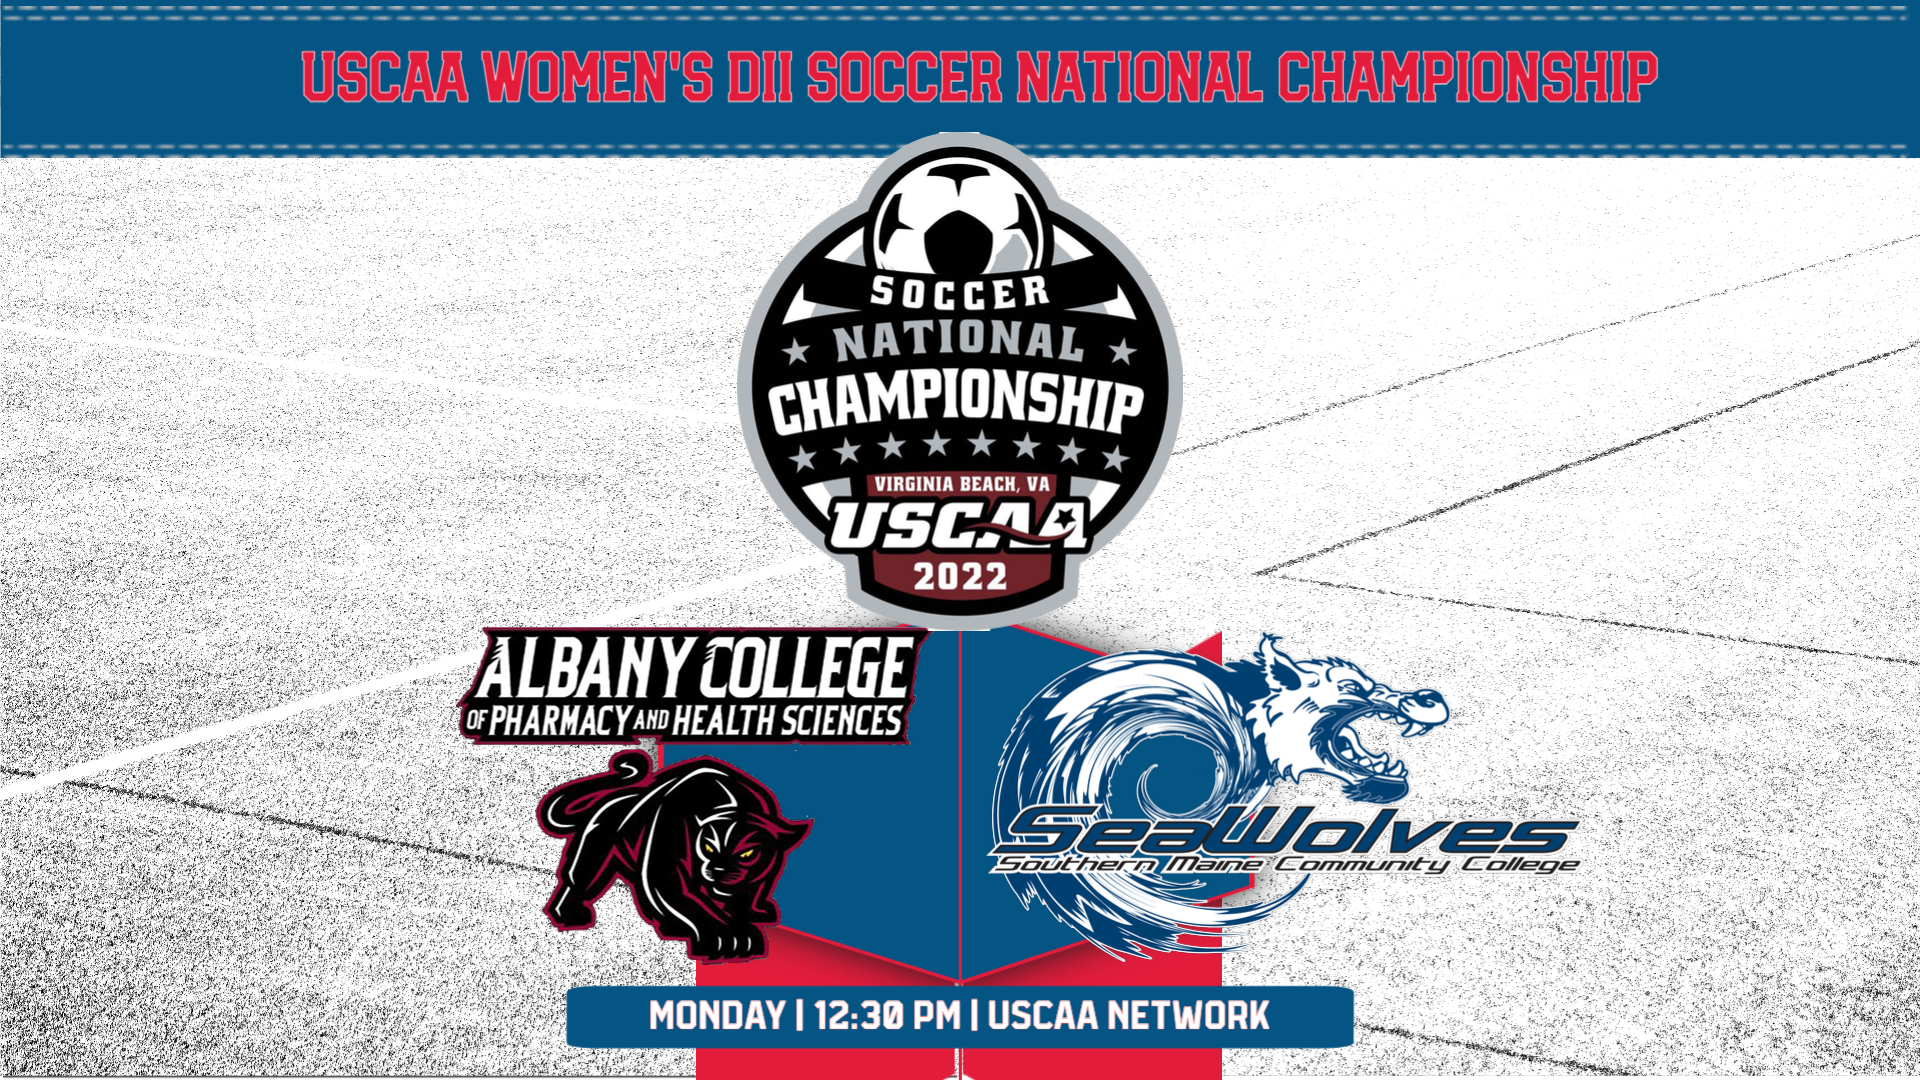 ACPHS Panthers and SMCC Seawolves to face off in USCAA Women's DII Soccer National Championship.